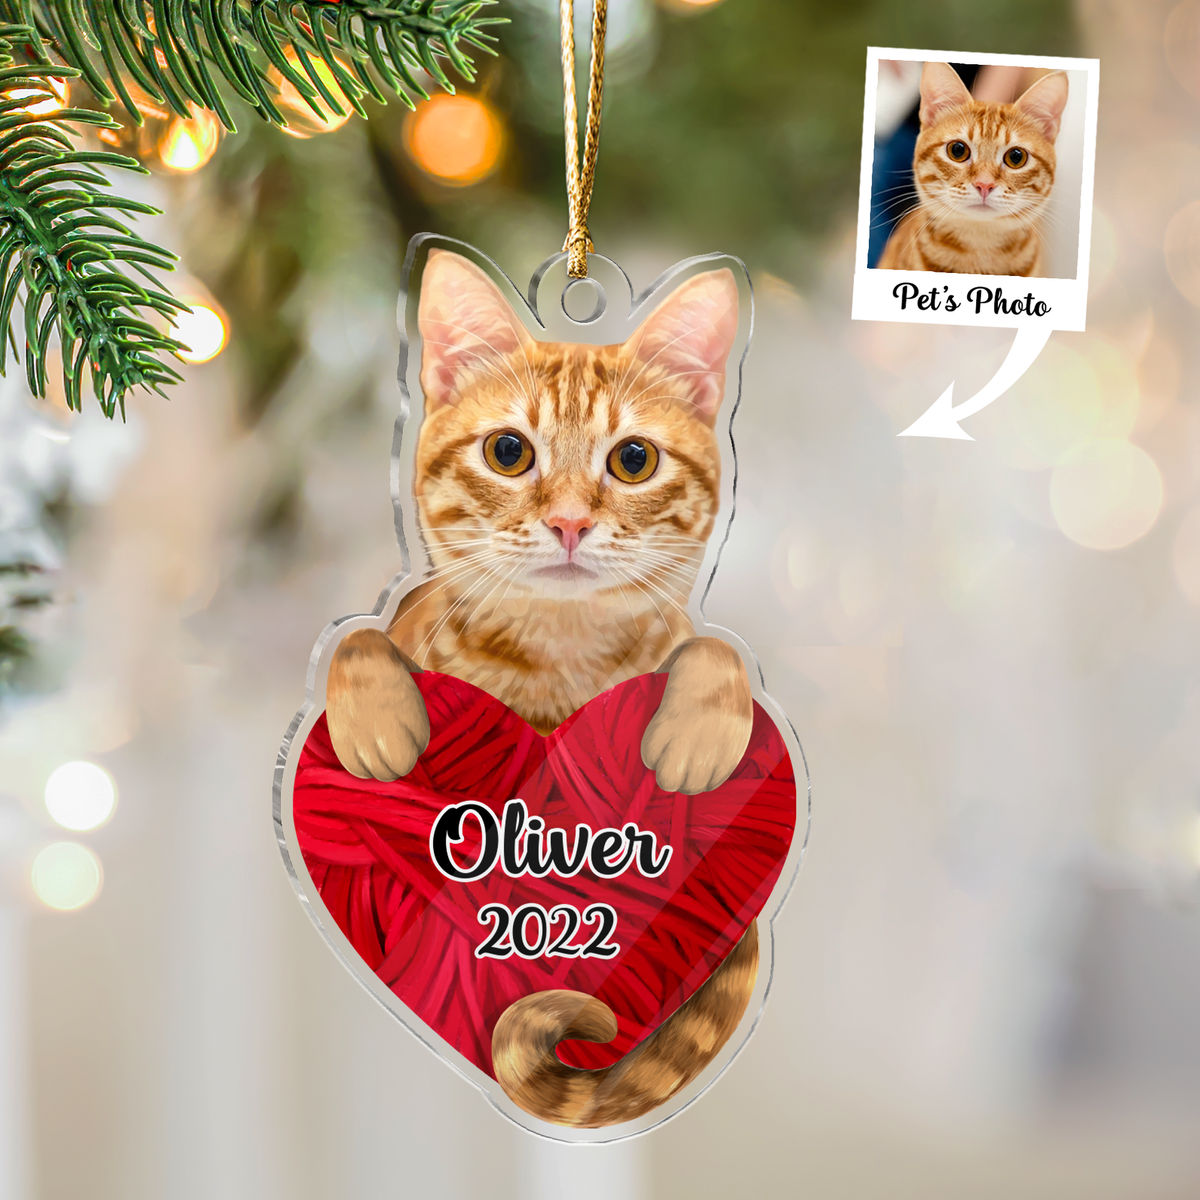 Photo Ornament - Customized Your Photo Ornament - Christmas Gifts For Pet Lover - Cat Hugging Heart - Custom Acrylic Ornament From Photo